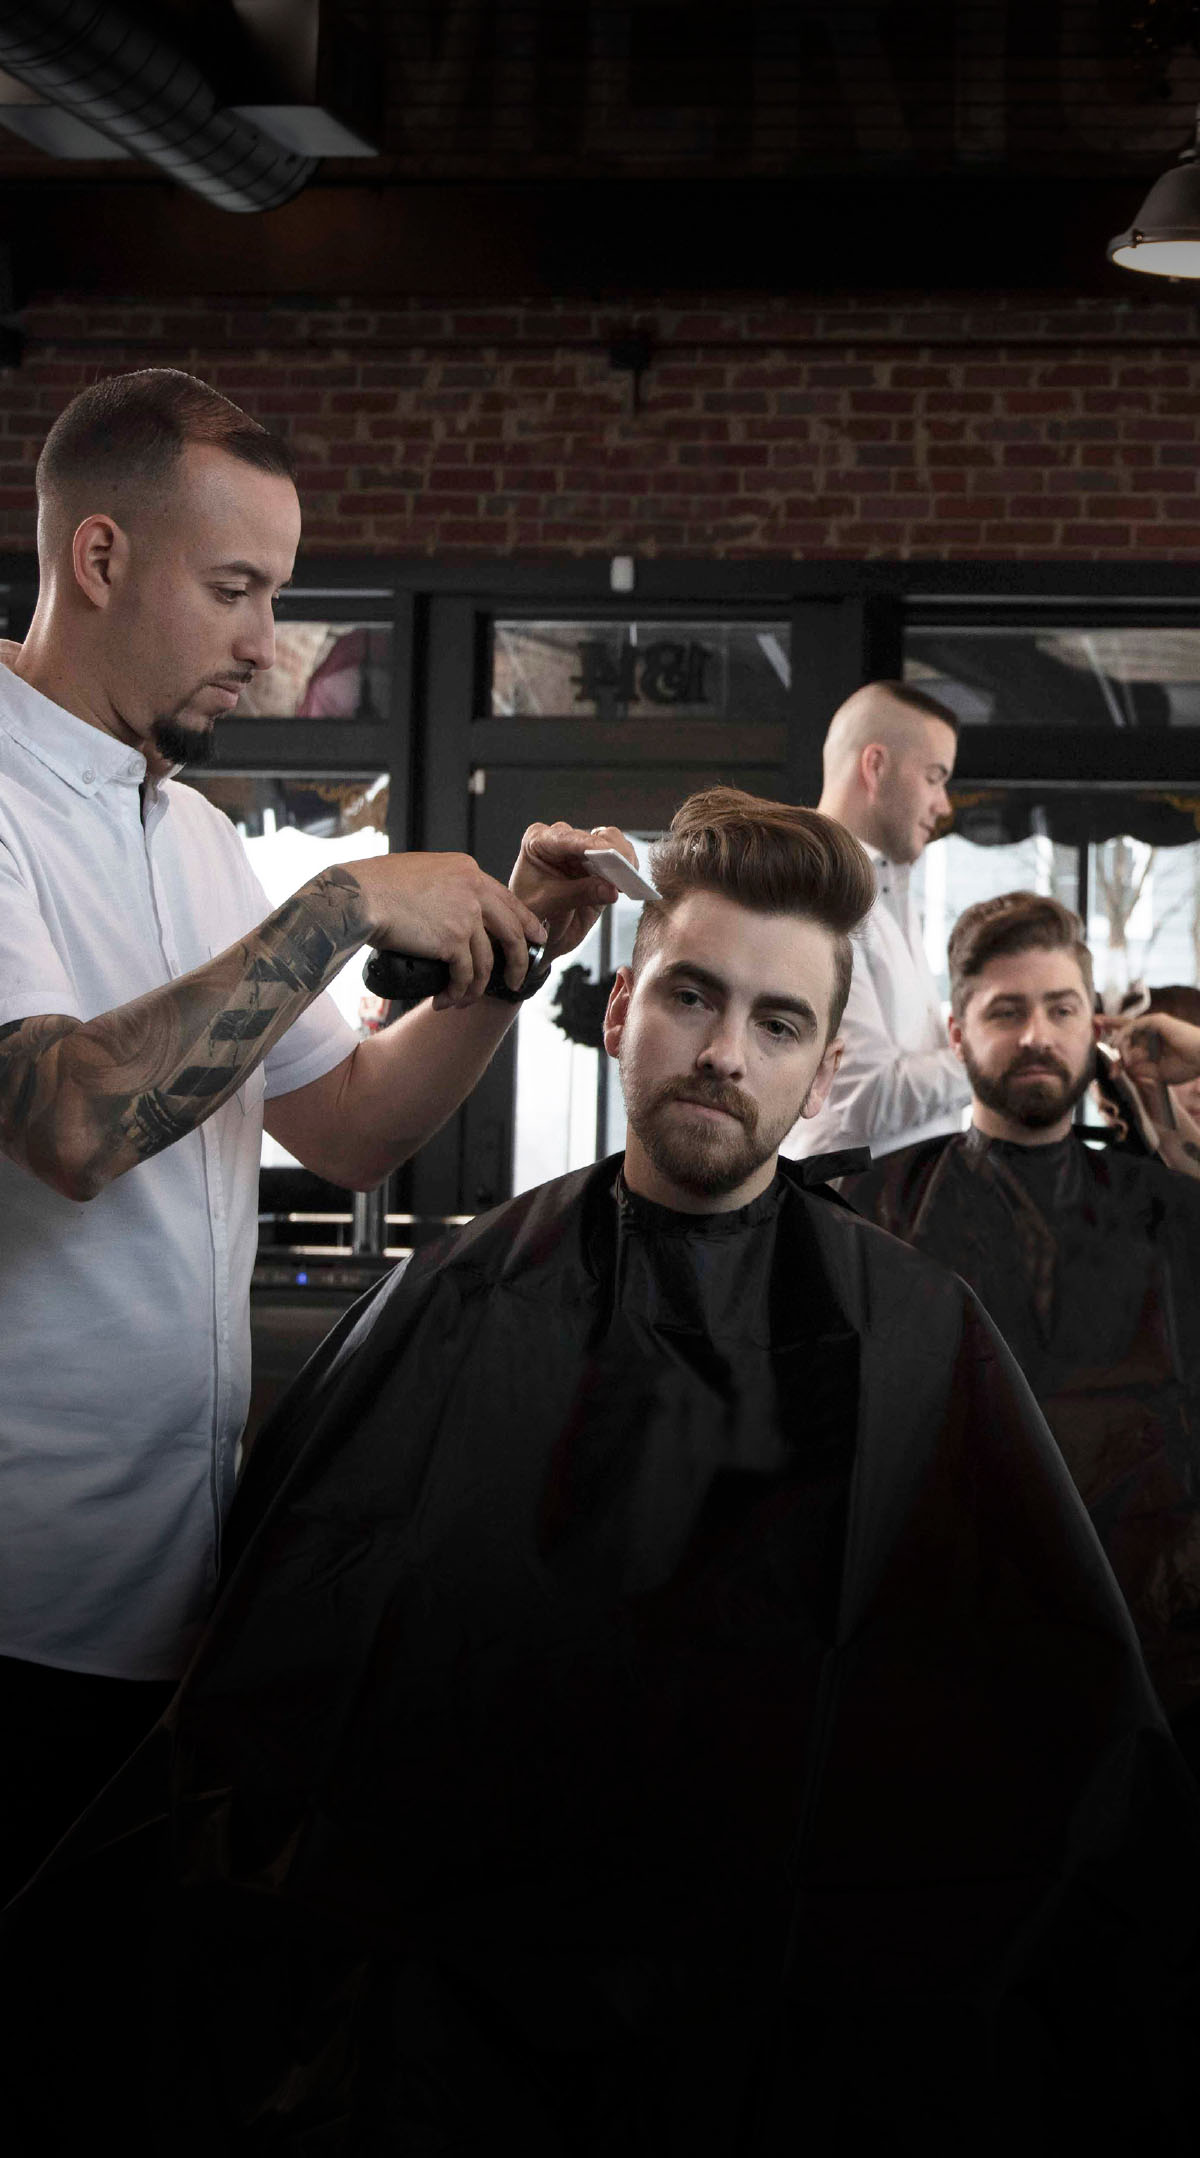 Learn with Andis - Product in use in Barber Shop